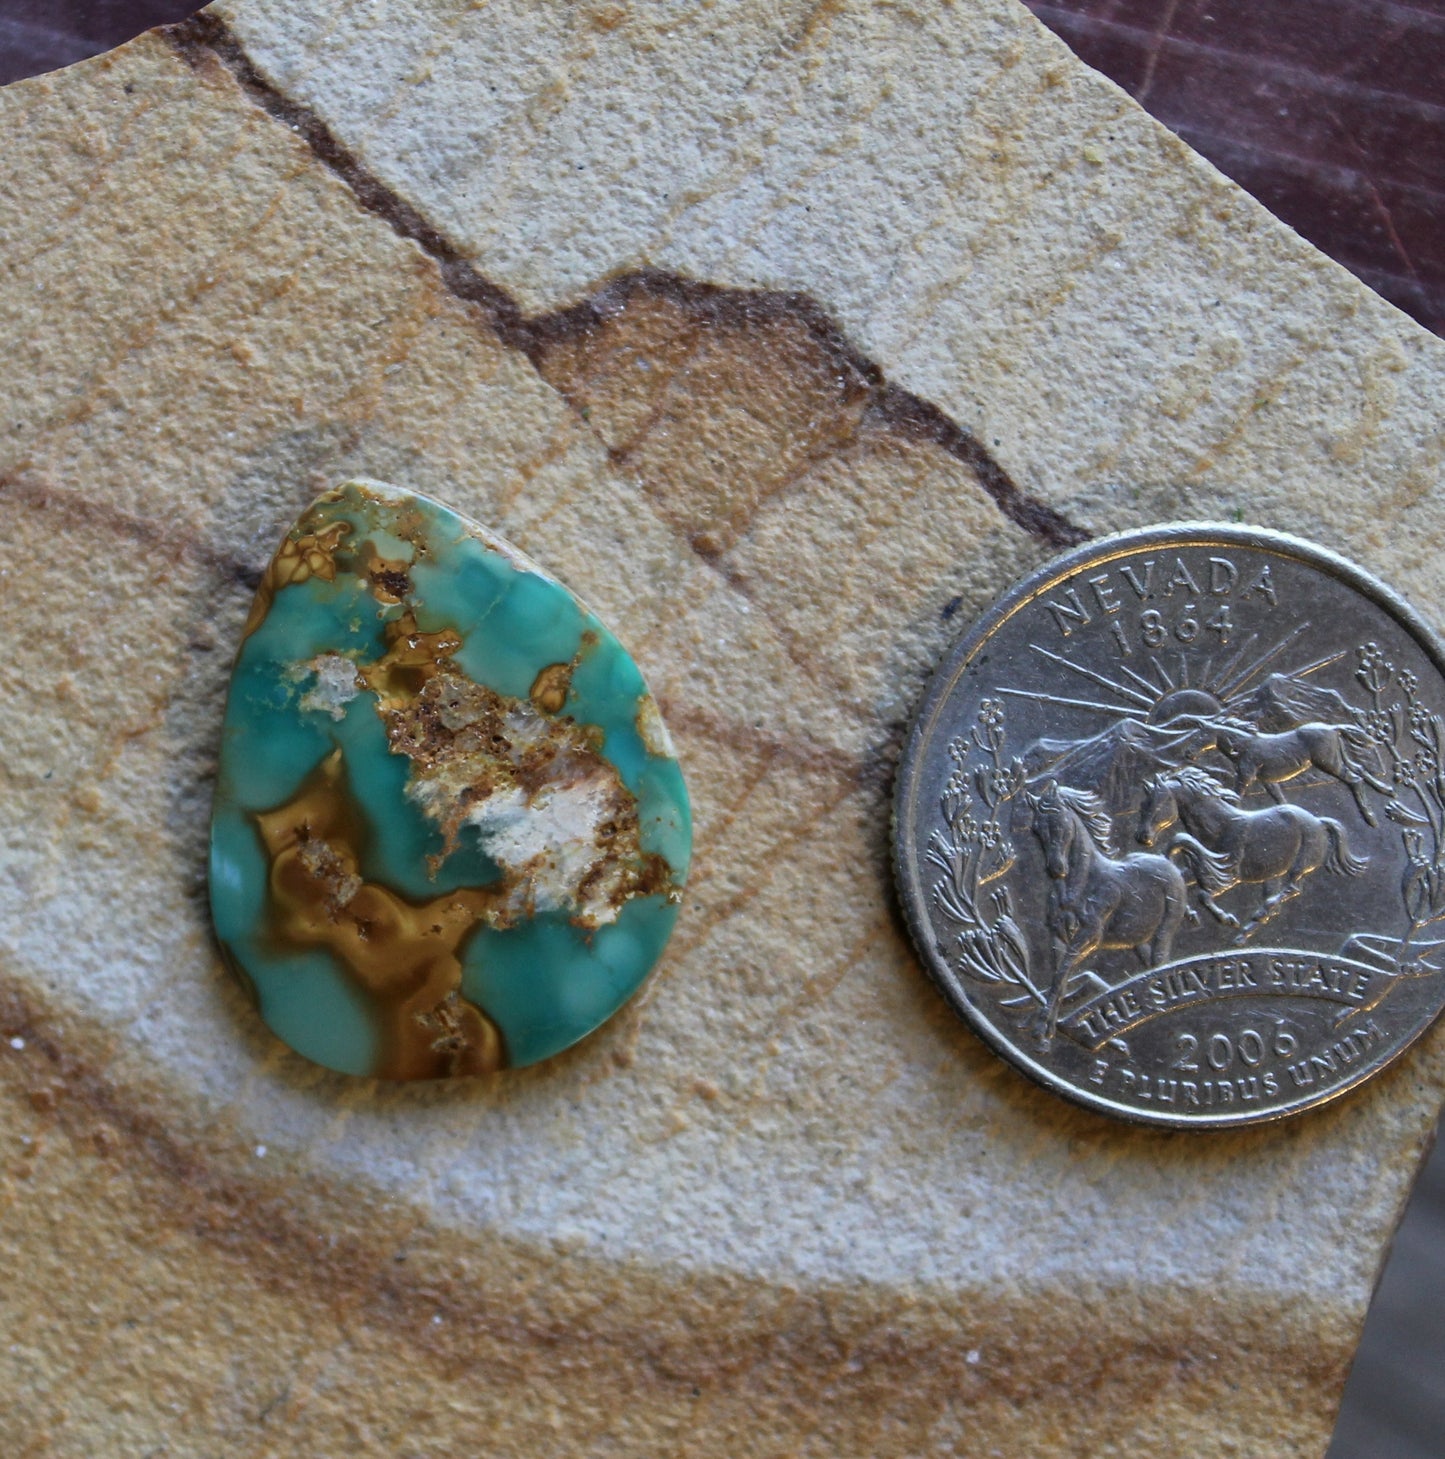 12 carat green Stone Mountain Turquoise cabochon with red inclusions